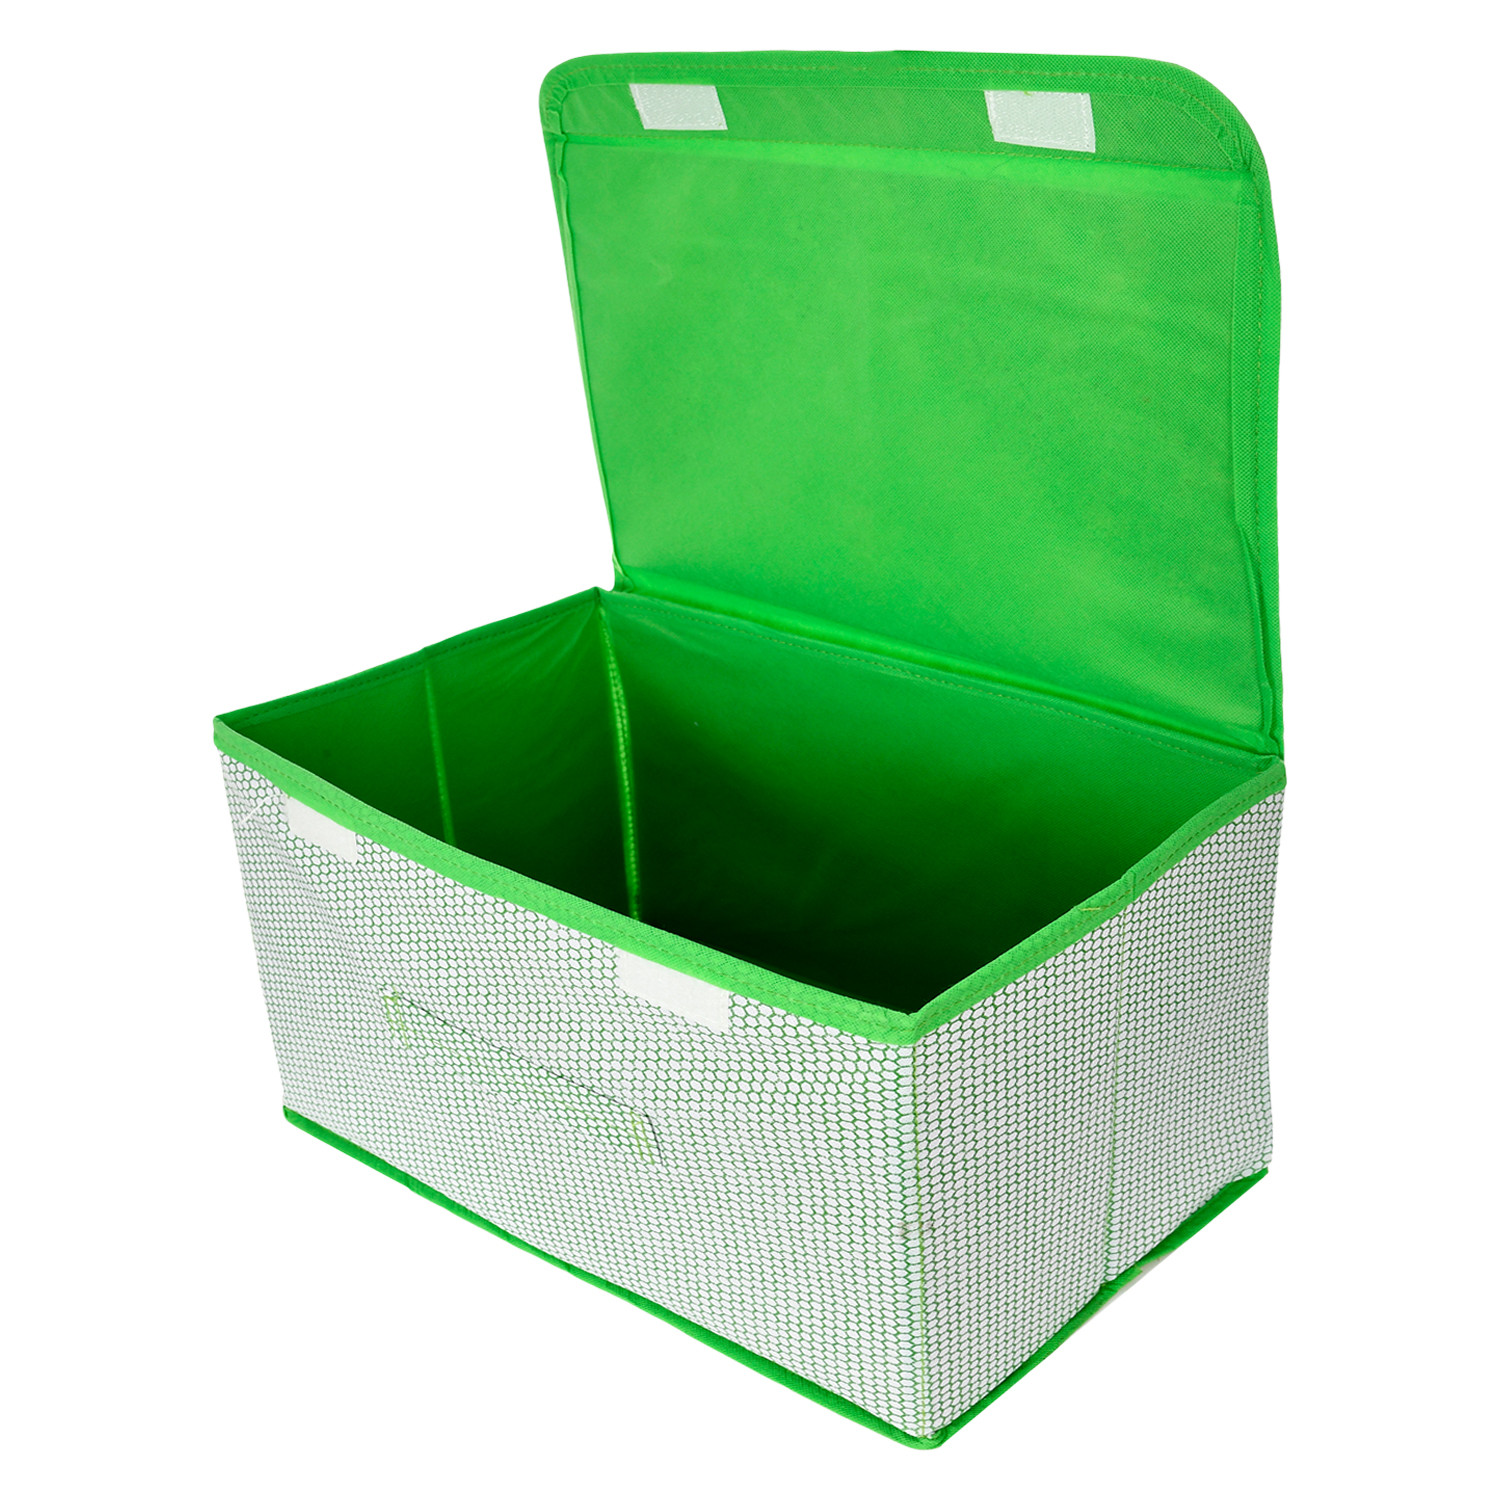 Kuber Industries Drawer Storage Box | Foldable Dhakkan Storage Box | Non-Woven Clothes Organizer For Toys | Storage Box with Handle | Large | Pack of 3 | Green & Gray